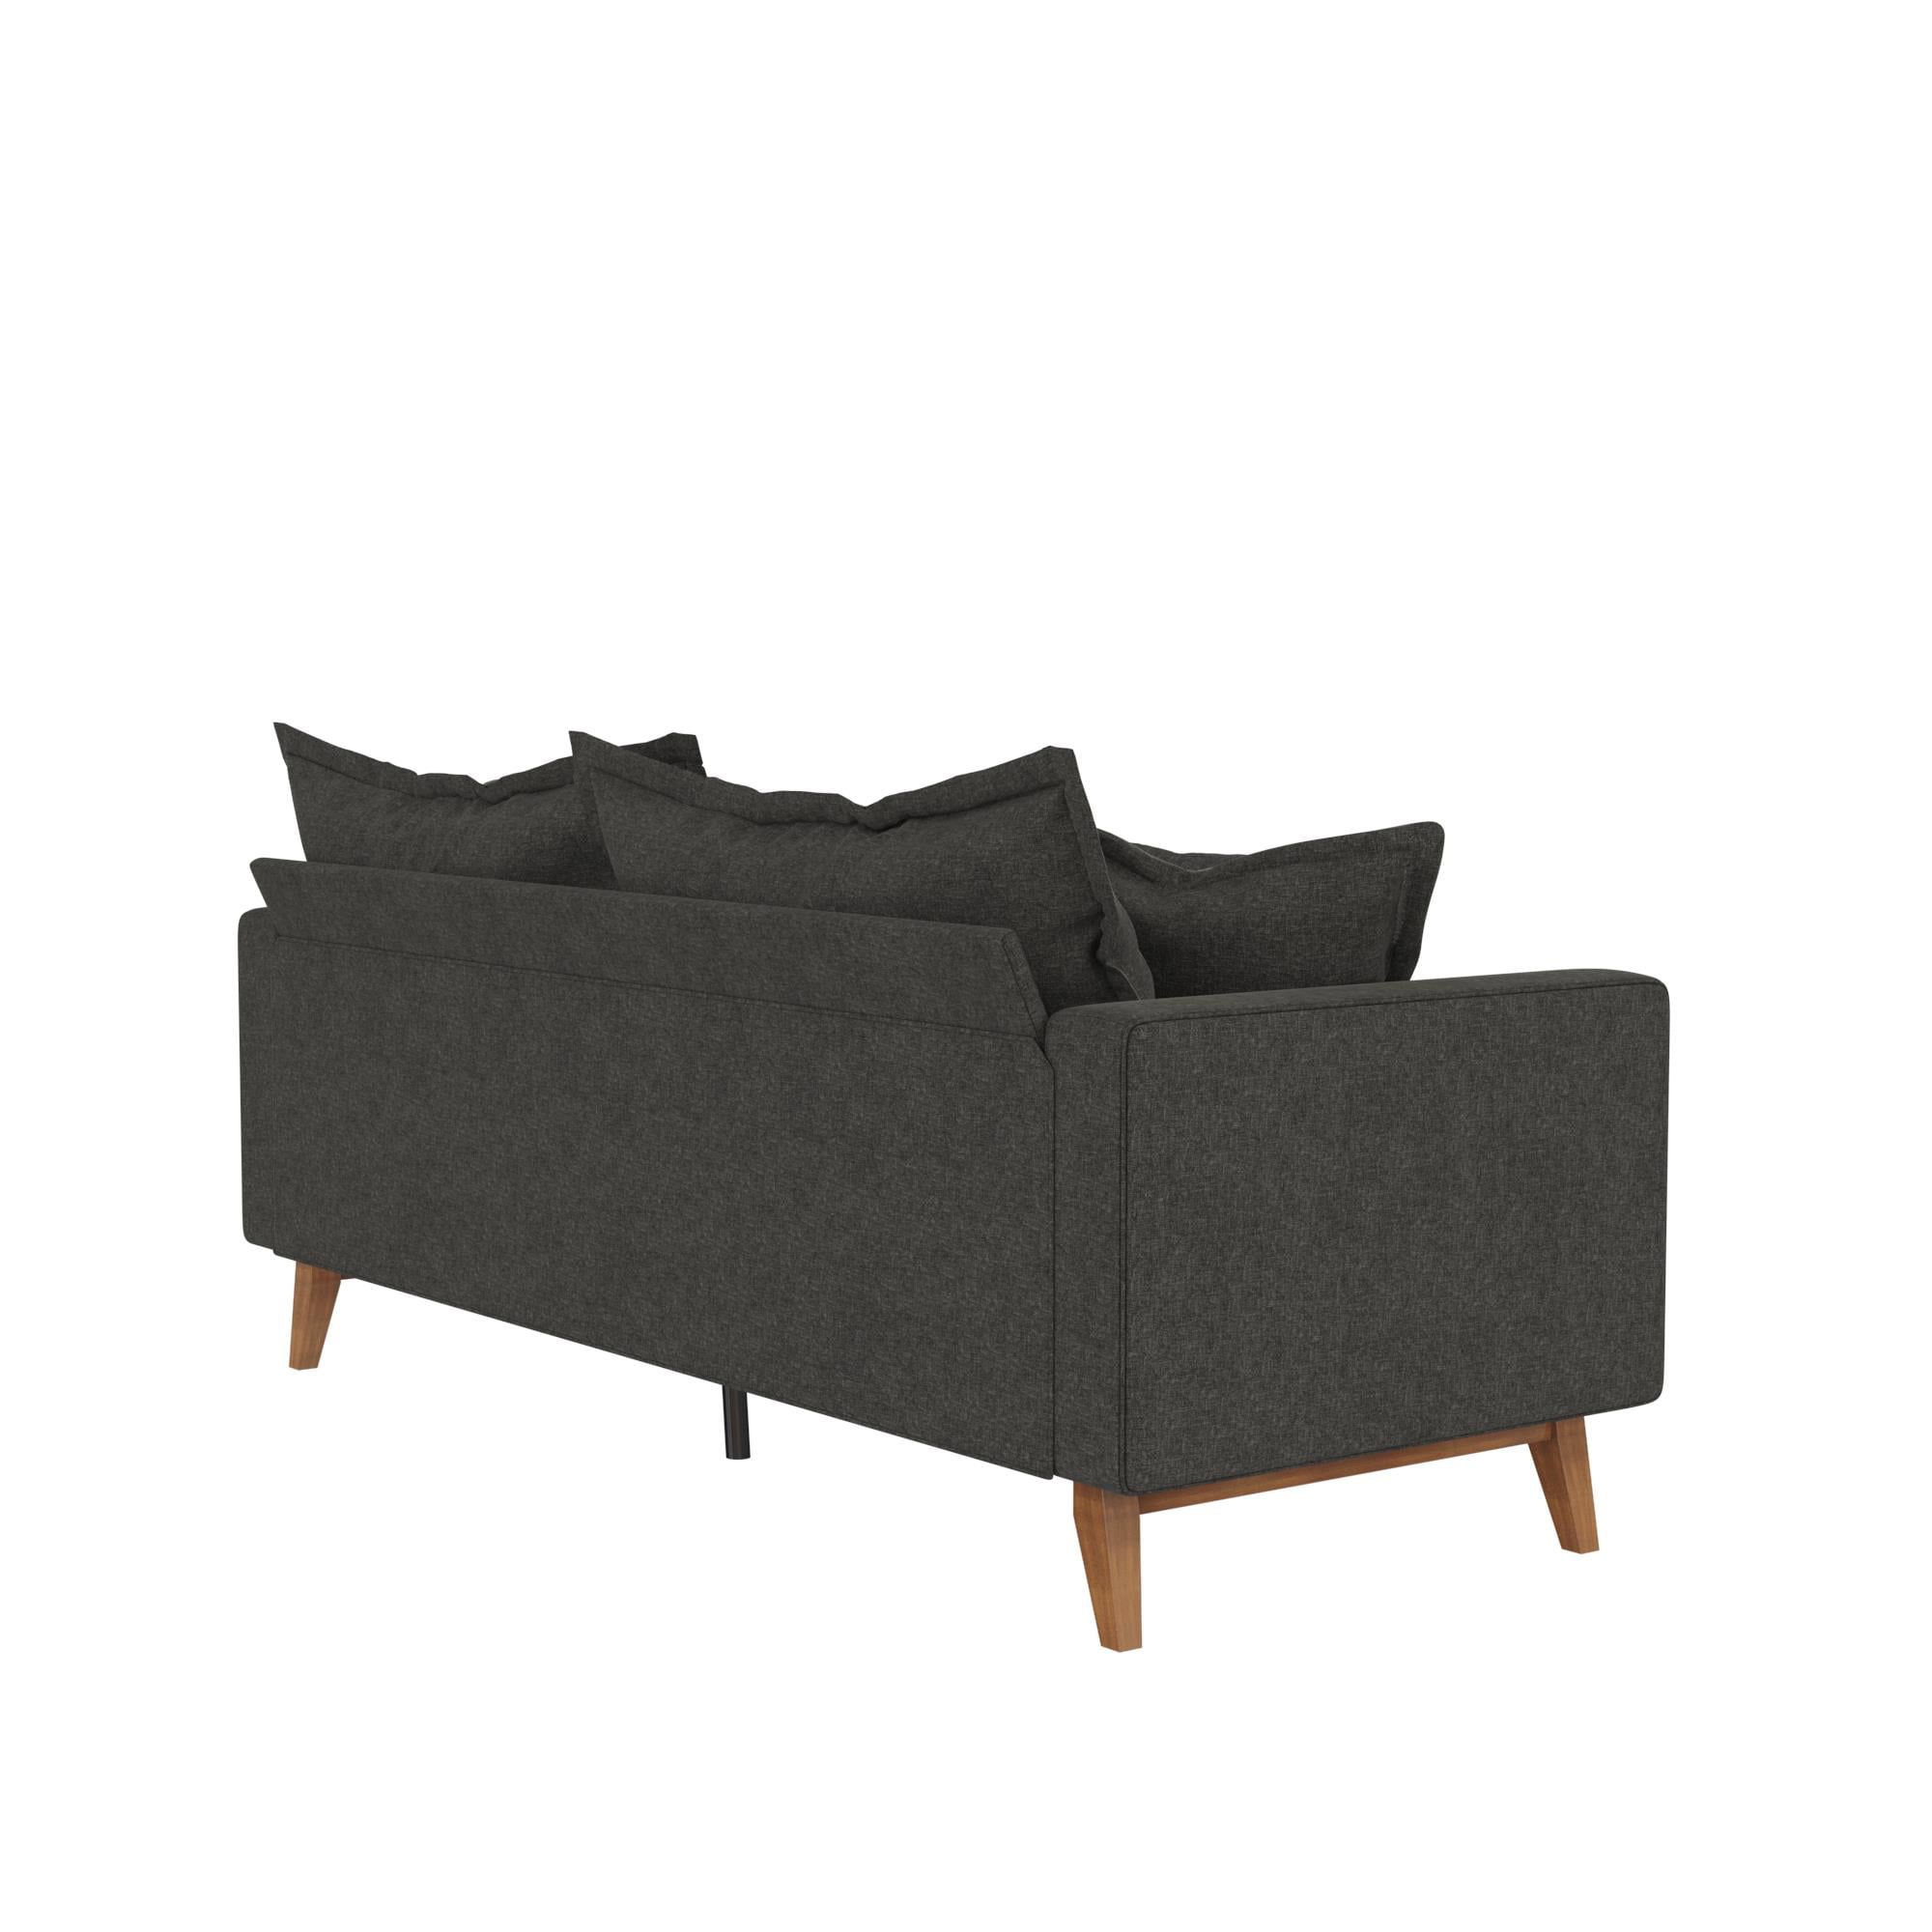 Dhp Miriam Pillowback Wood Base Sofa, Gray Linen – Walmart Throughout Sofas With Pillowback Wood Bases (Gallery 15 of 20)